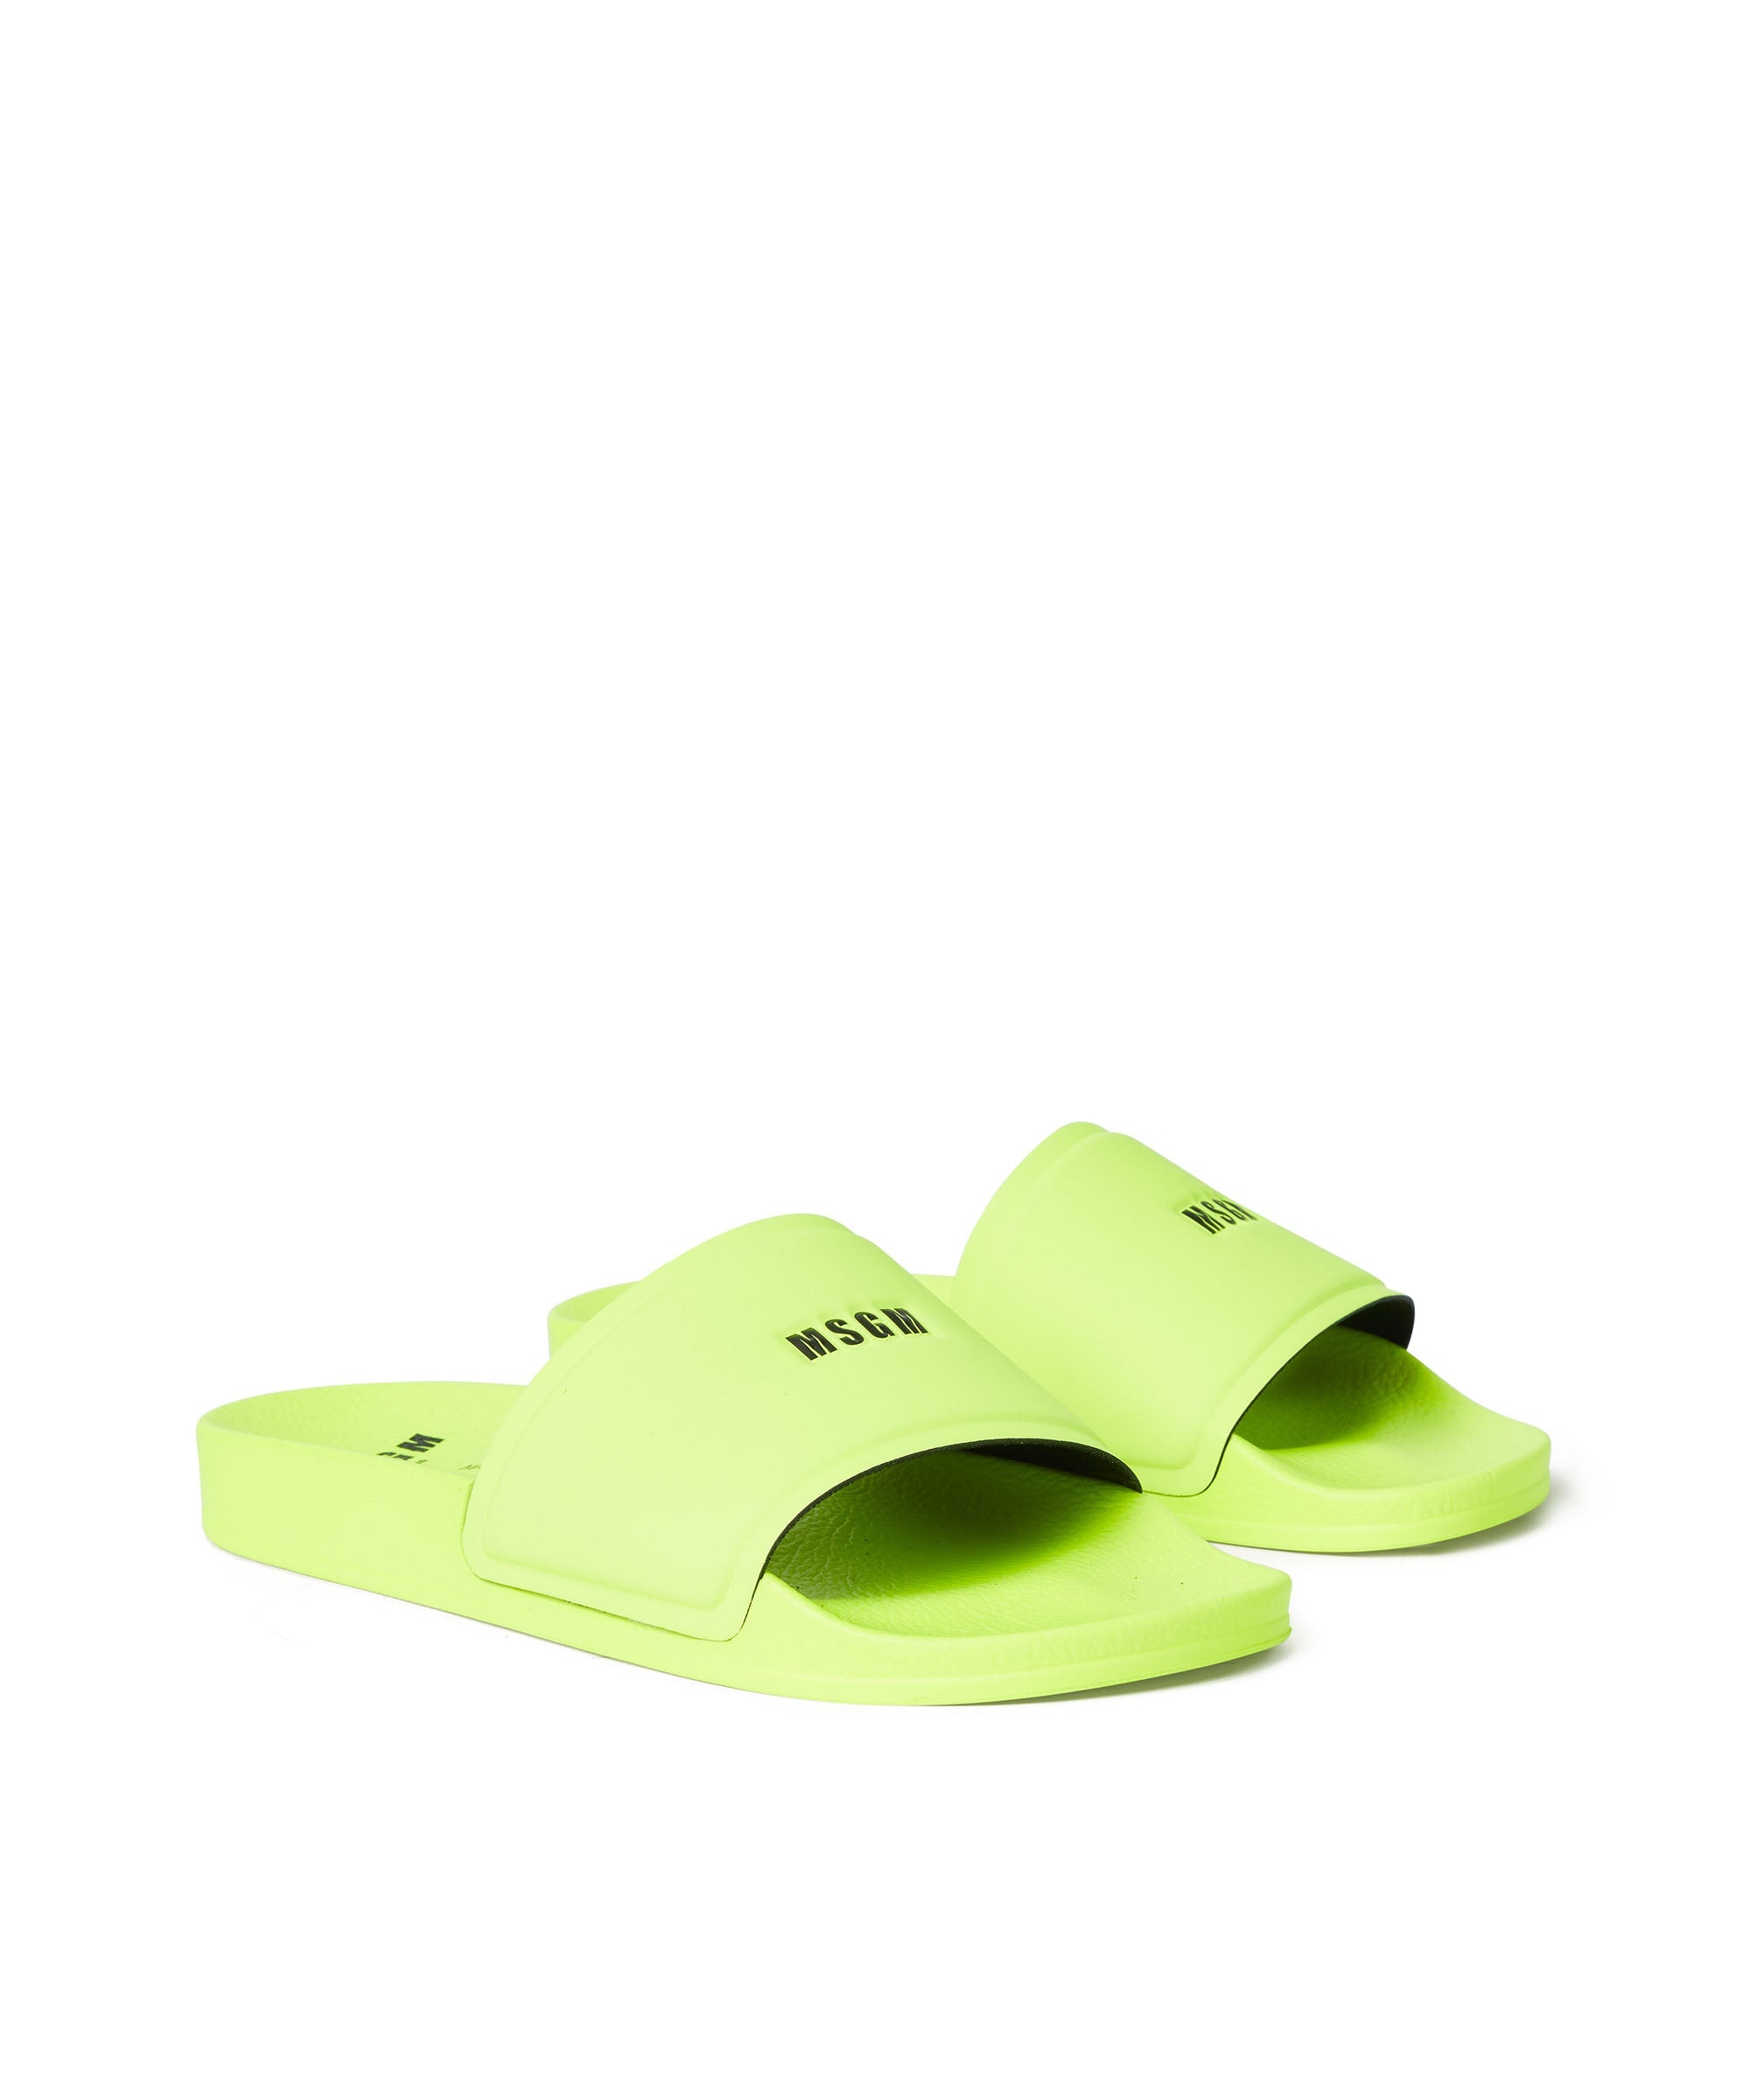 Pool slippers with MSGM micro logo - 1